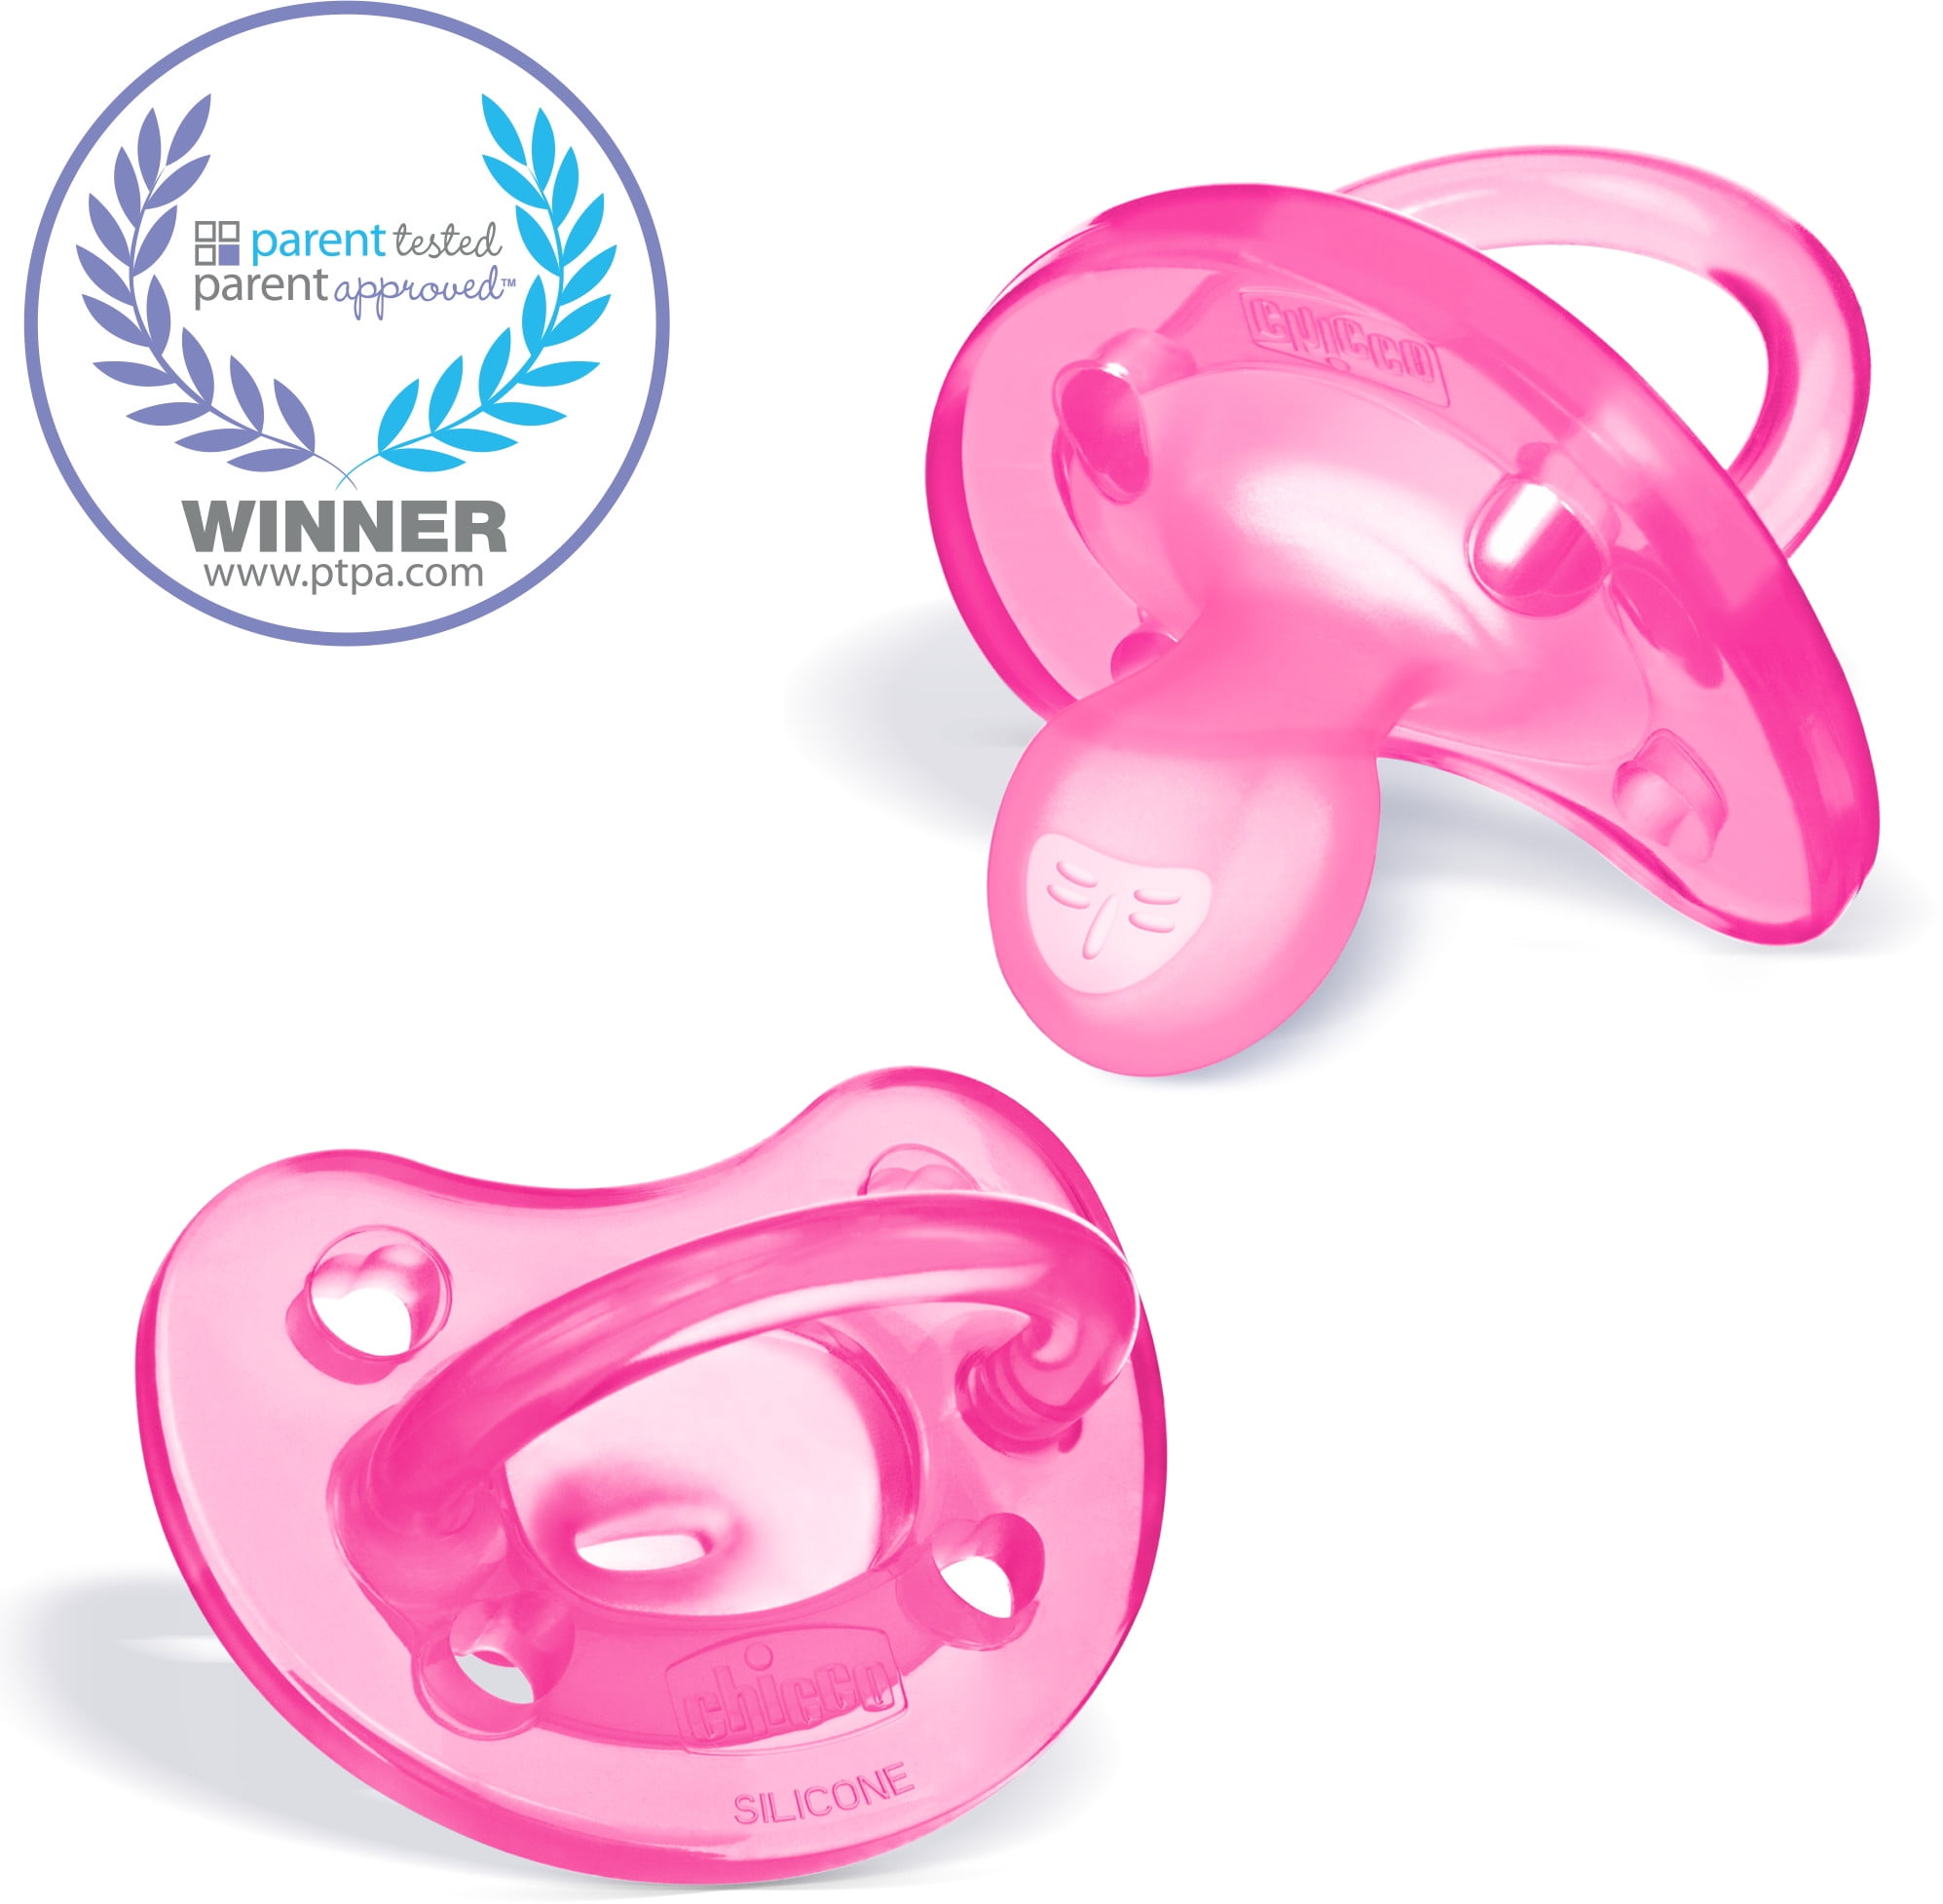 Clear Chicco 180800 Soft Silicone Pacifier for New Born Babies 2 Pack 